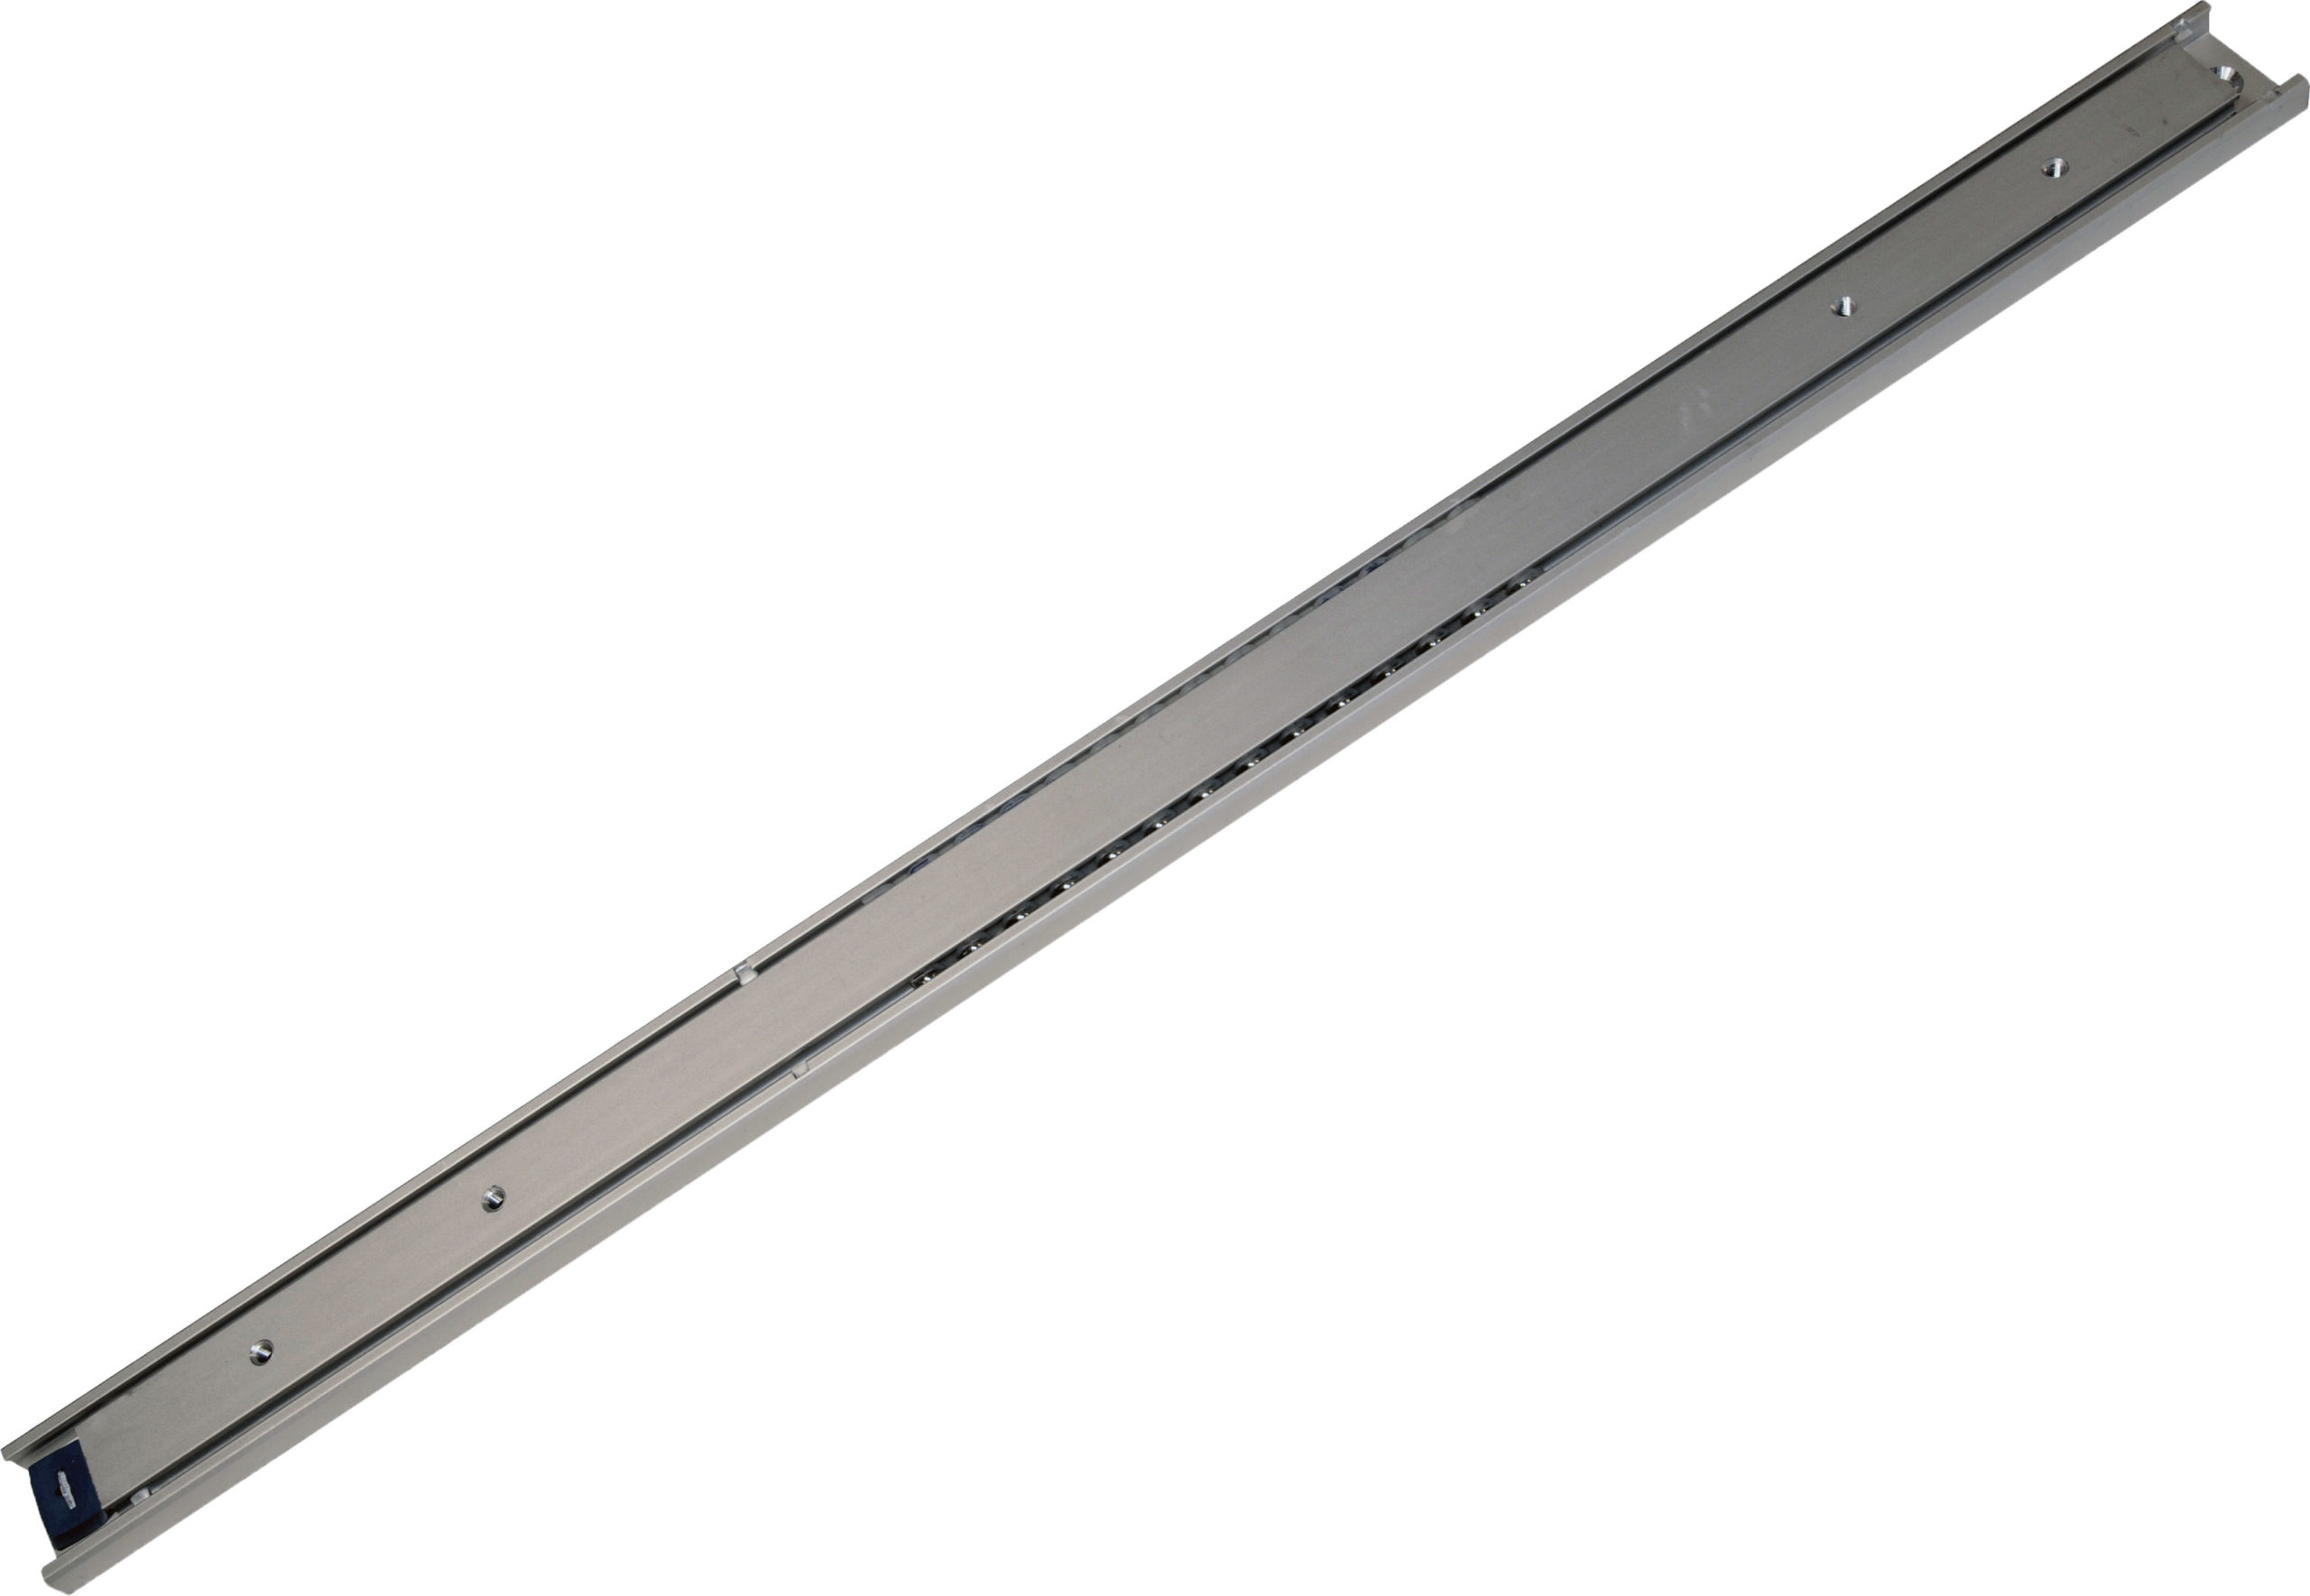 Optimize your Industrial Processes : The Advantages of Telescopic Slides and Linear Guide Rails